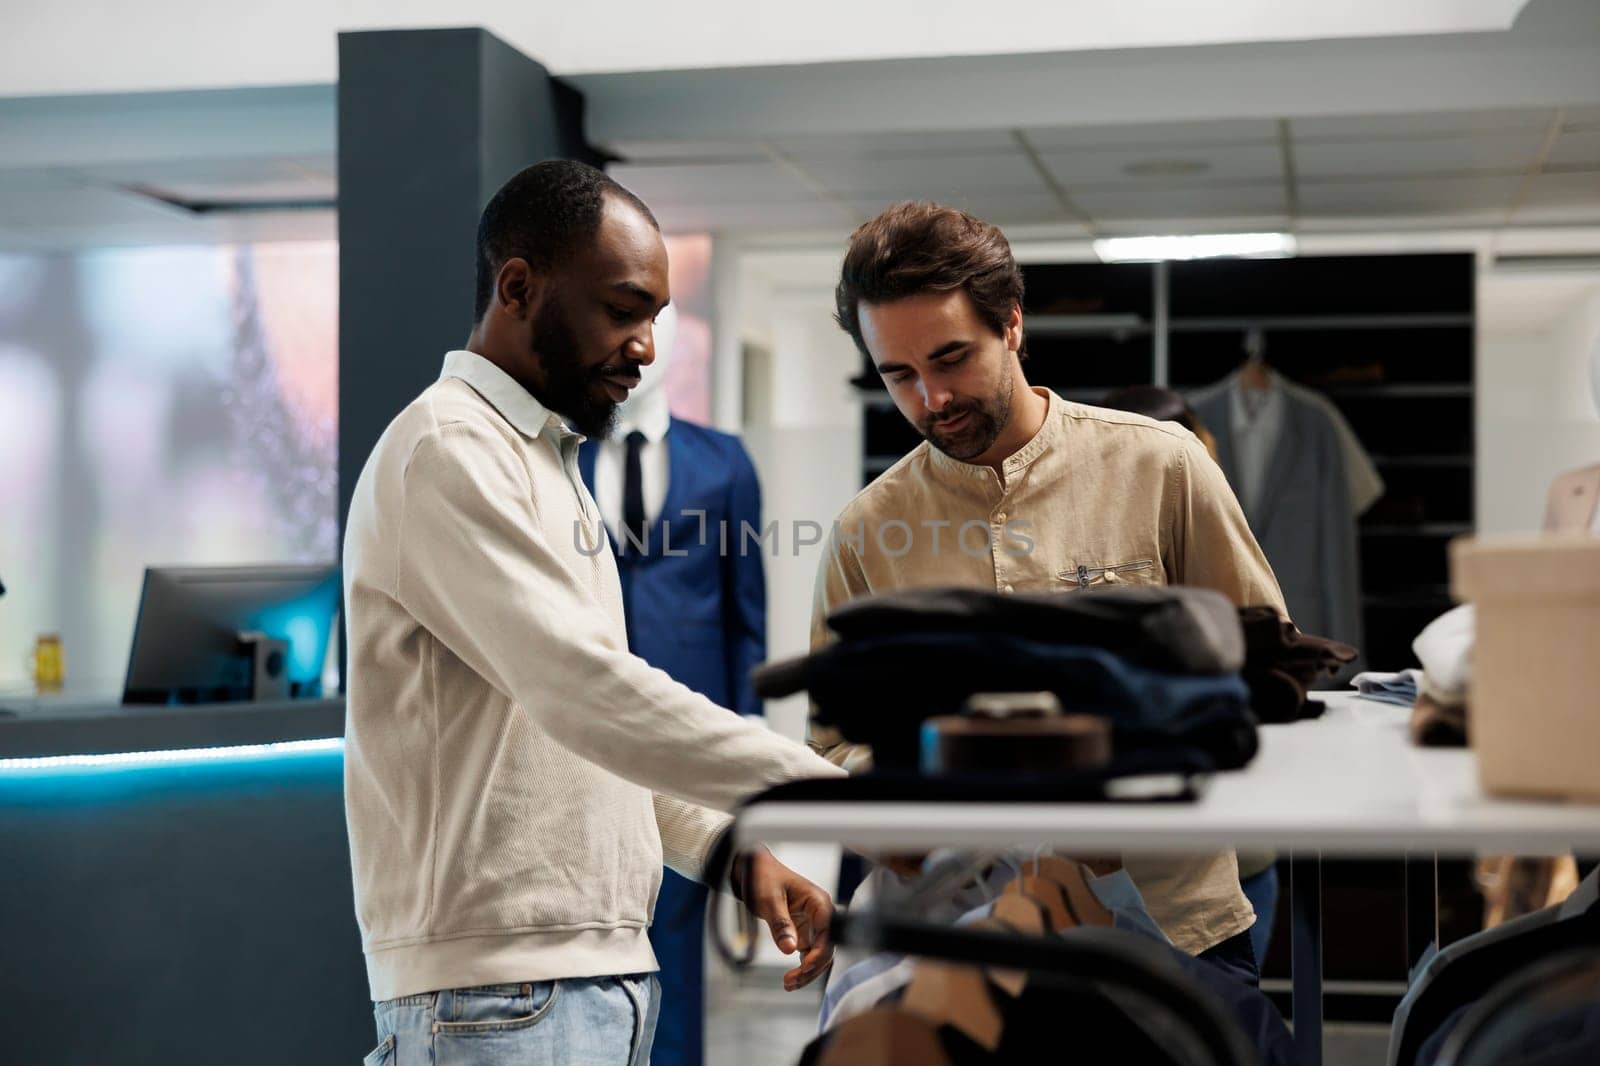 Clothing store shopper and assistant having conversation about fashion trends while exploring apparel rack. African american man asking boutique worker for help in choosing outfit